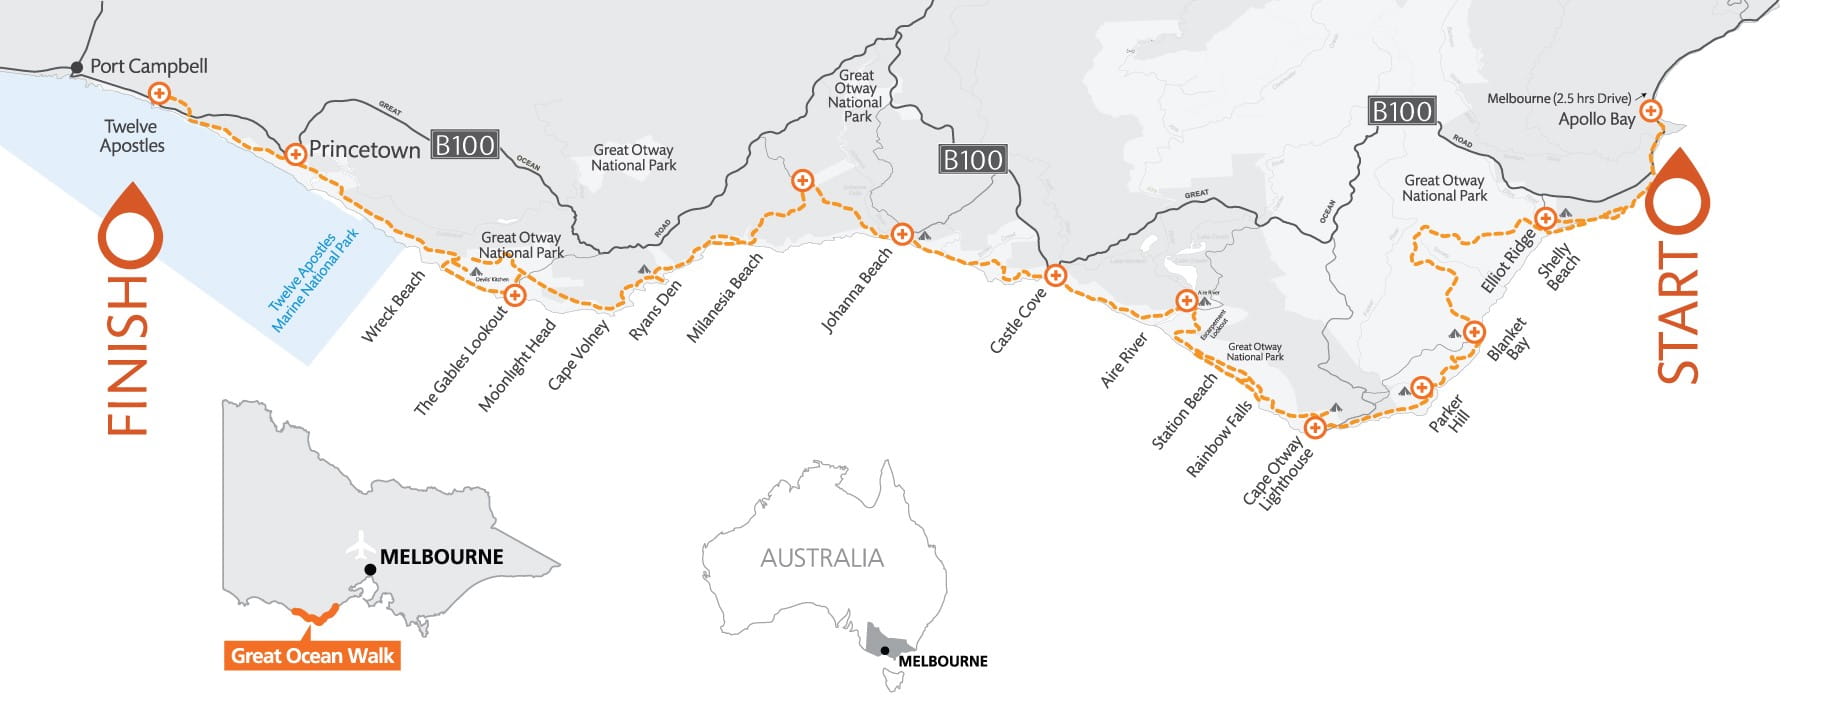 A map of the Great Ocean Walk